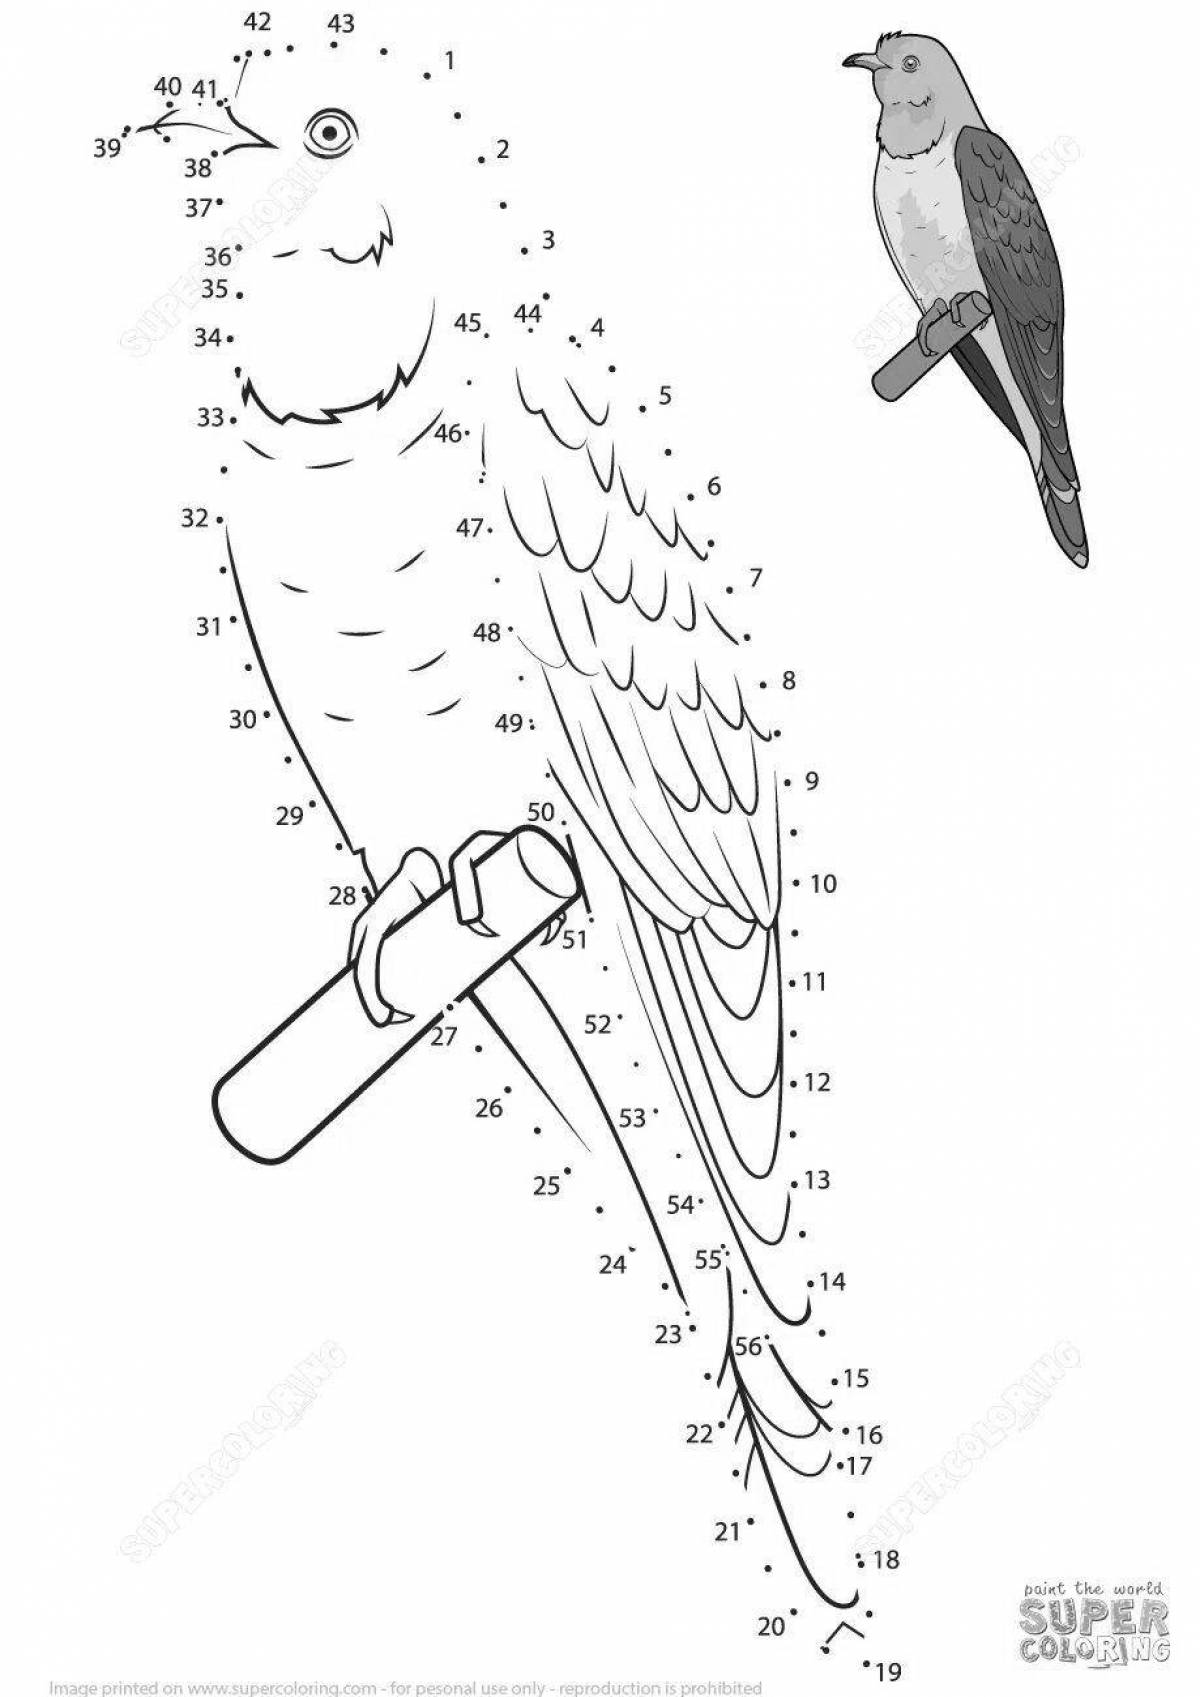 Radiant coloring page wintering birds by numbers